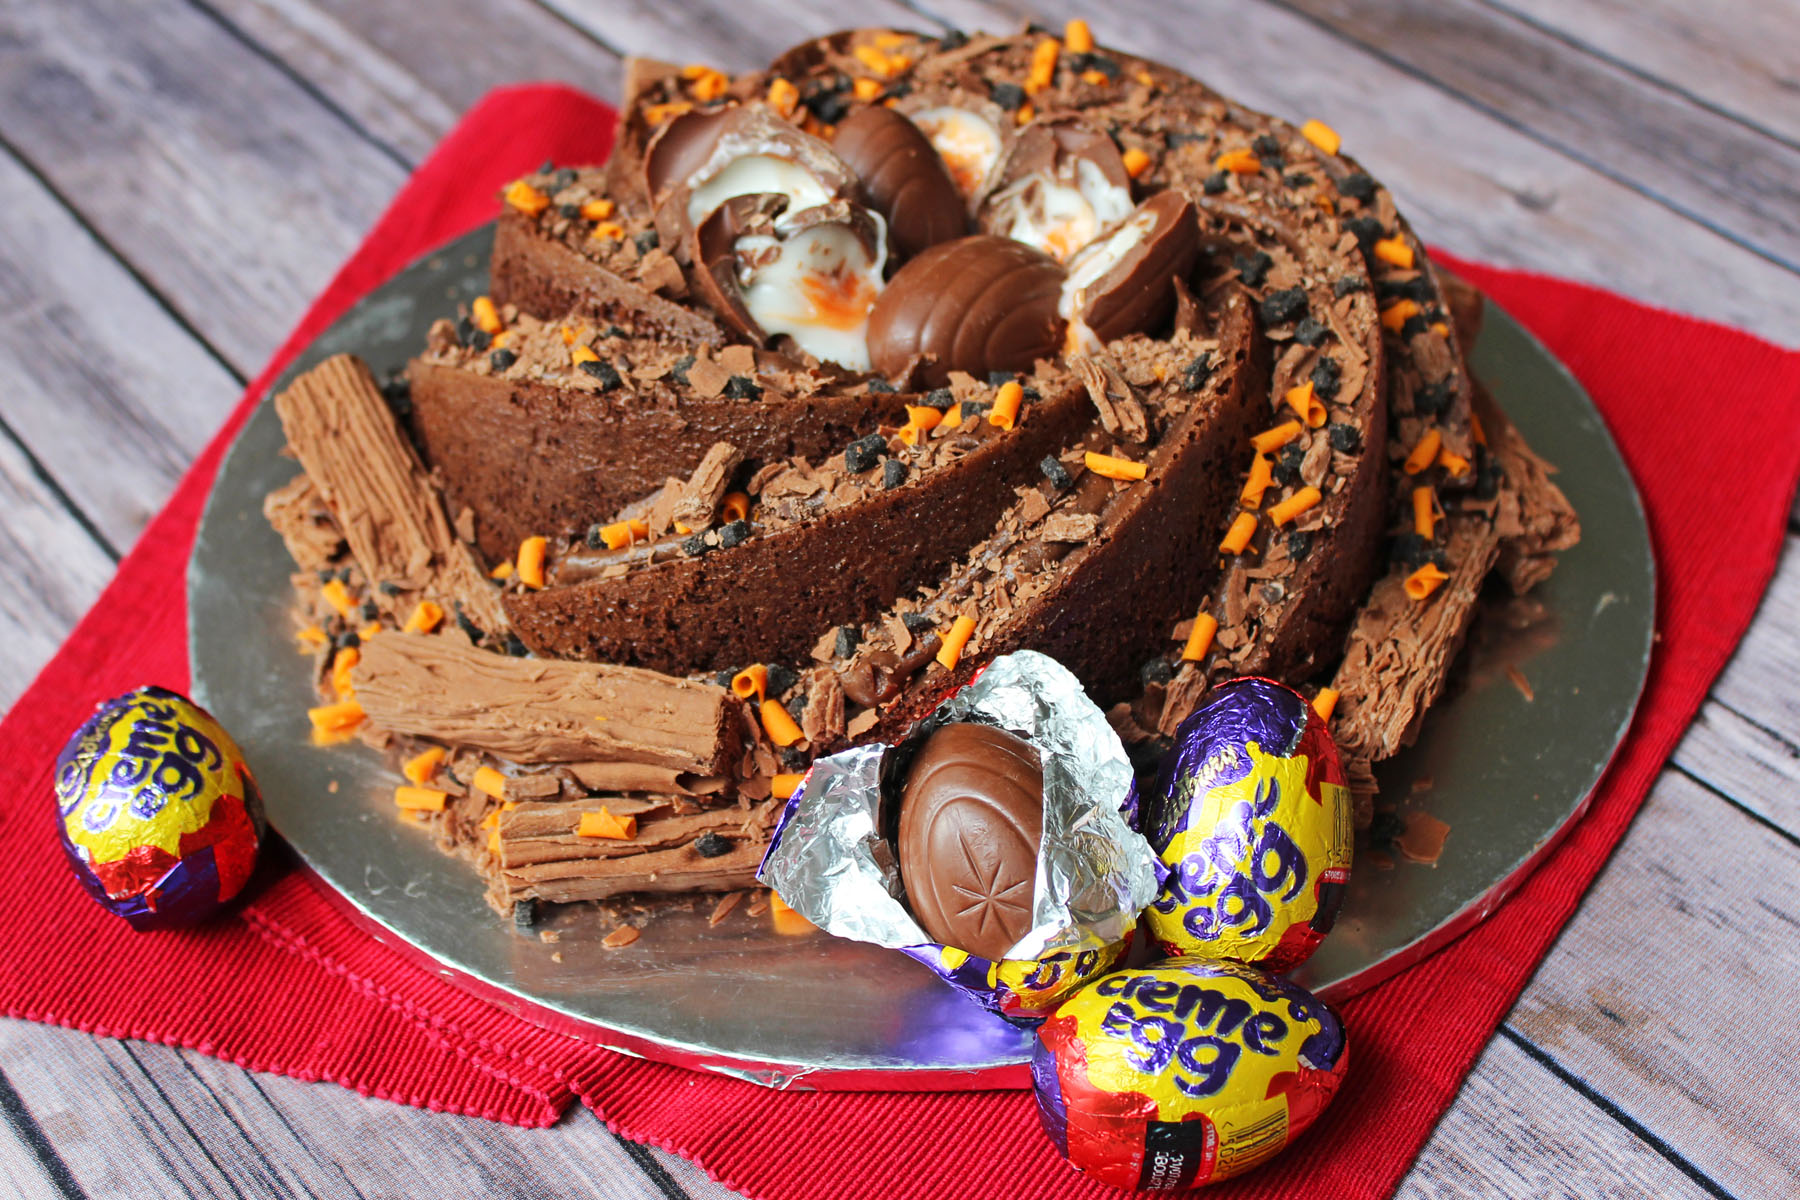 https://supperinthesuburbs.com/wp-content/uploads/2016/02/Creme-Egg-lovers-will-go-crazy-for-this-eggstravagent-Creme-Egg-Bundt-Cake-Recipe-on-Supper-in-the-Suburbs.jpg